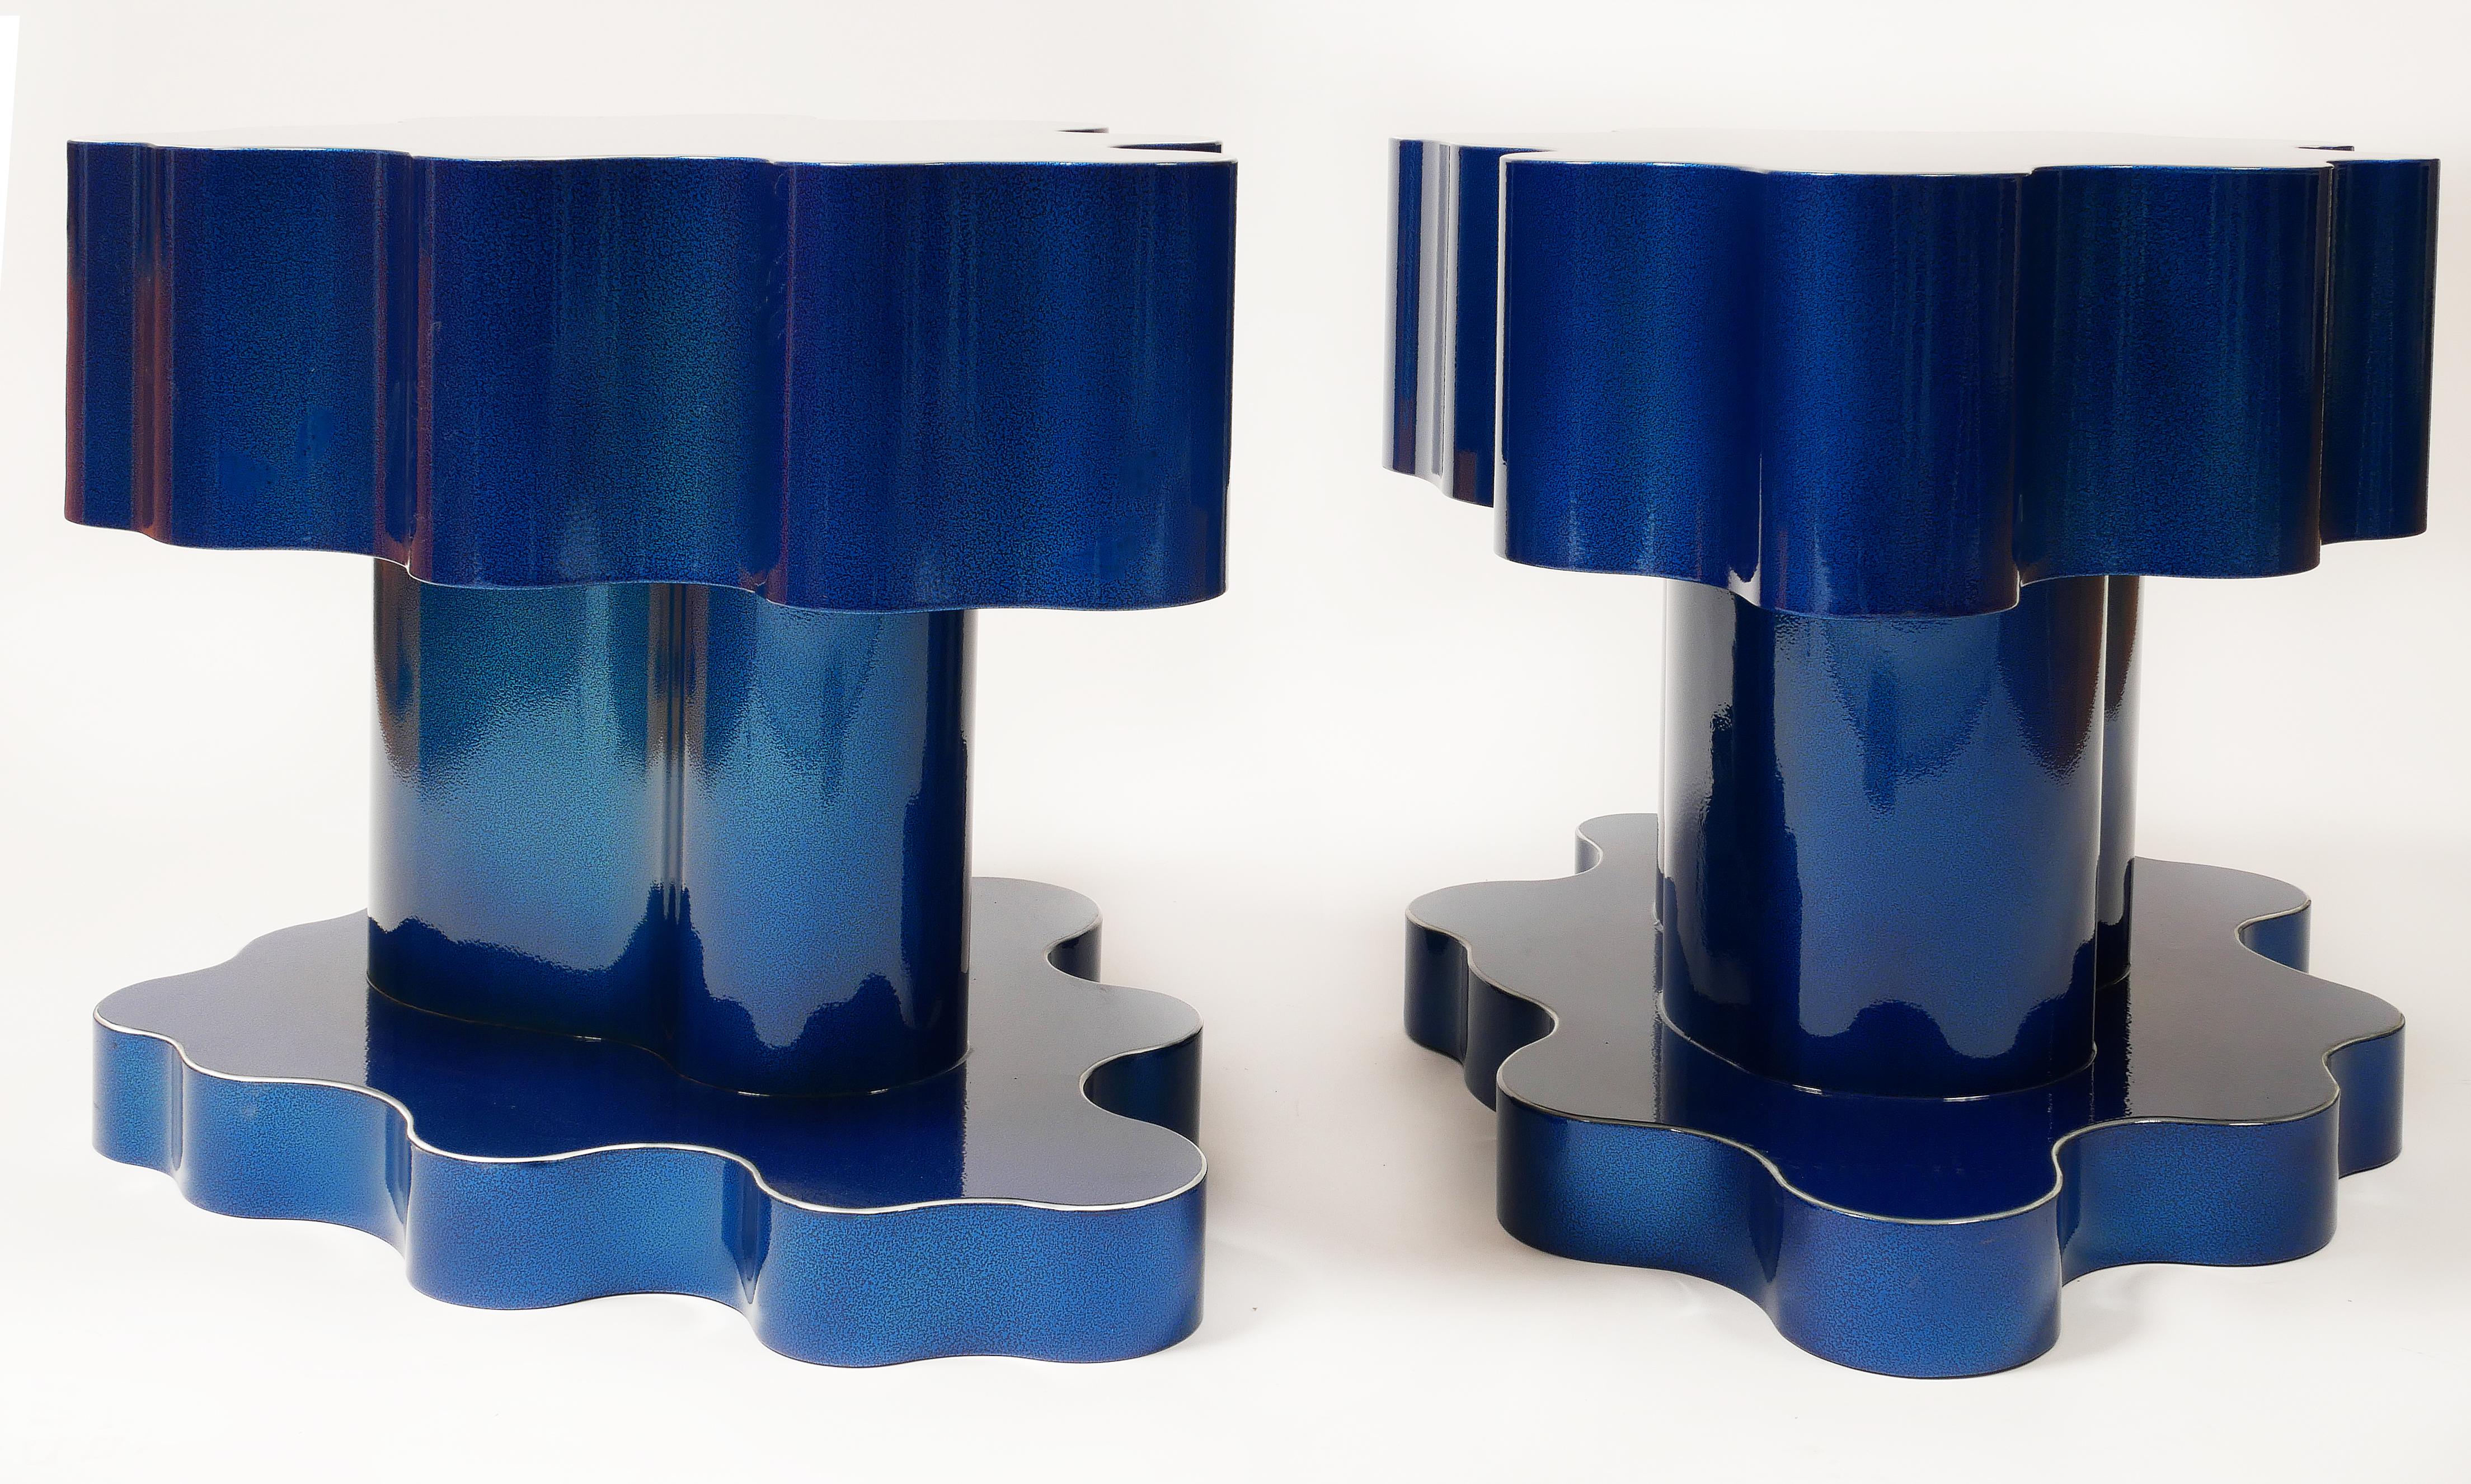 Bert Furnari Studio free-form Abstract side tables, pair 

Offered for sale is a pair of Bert Furnari Studio one-of-a-kind, free form powder-coated aluminum pedestal style side tables with a signature 'bespoke blue